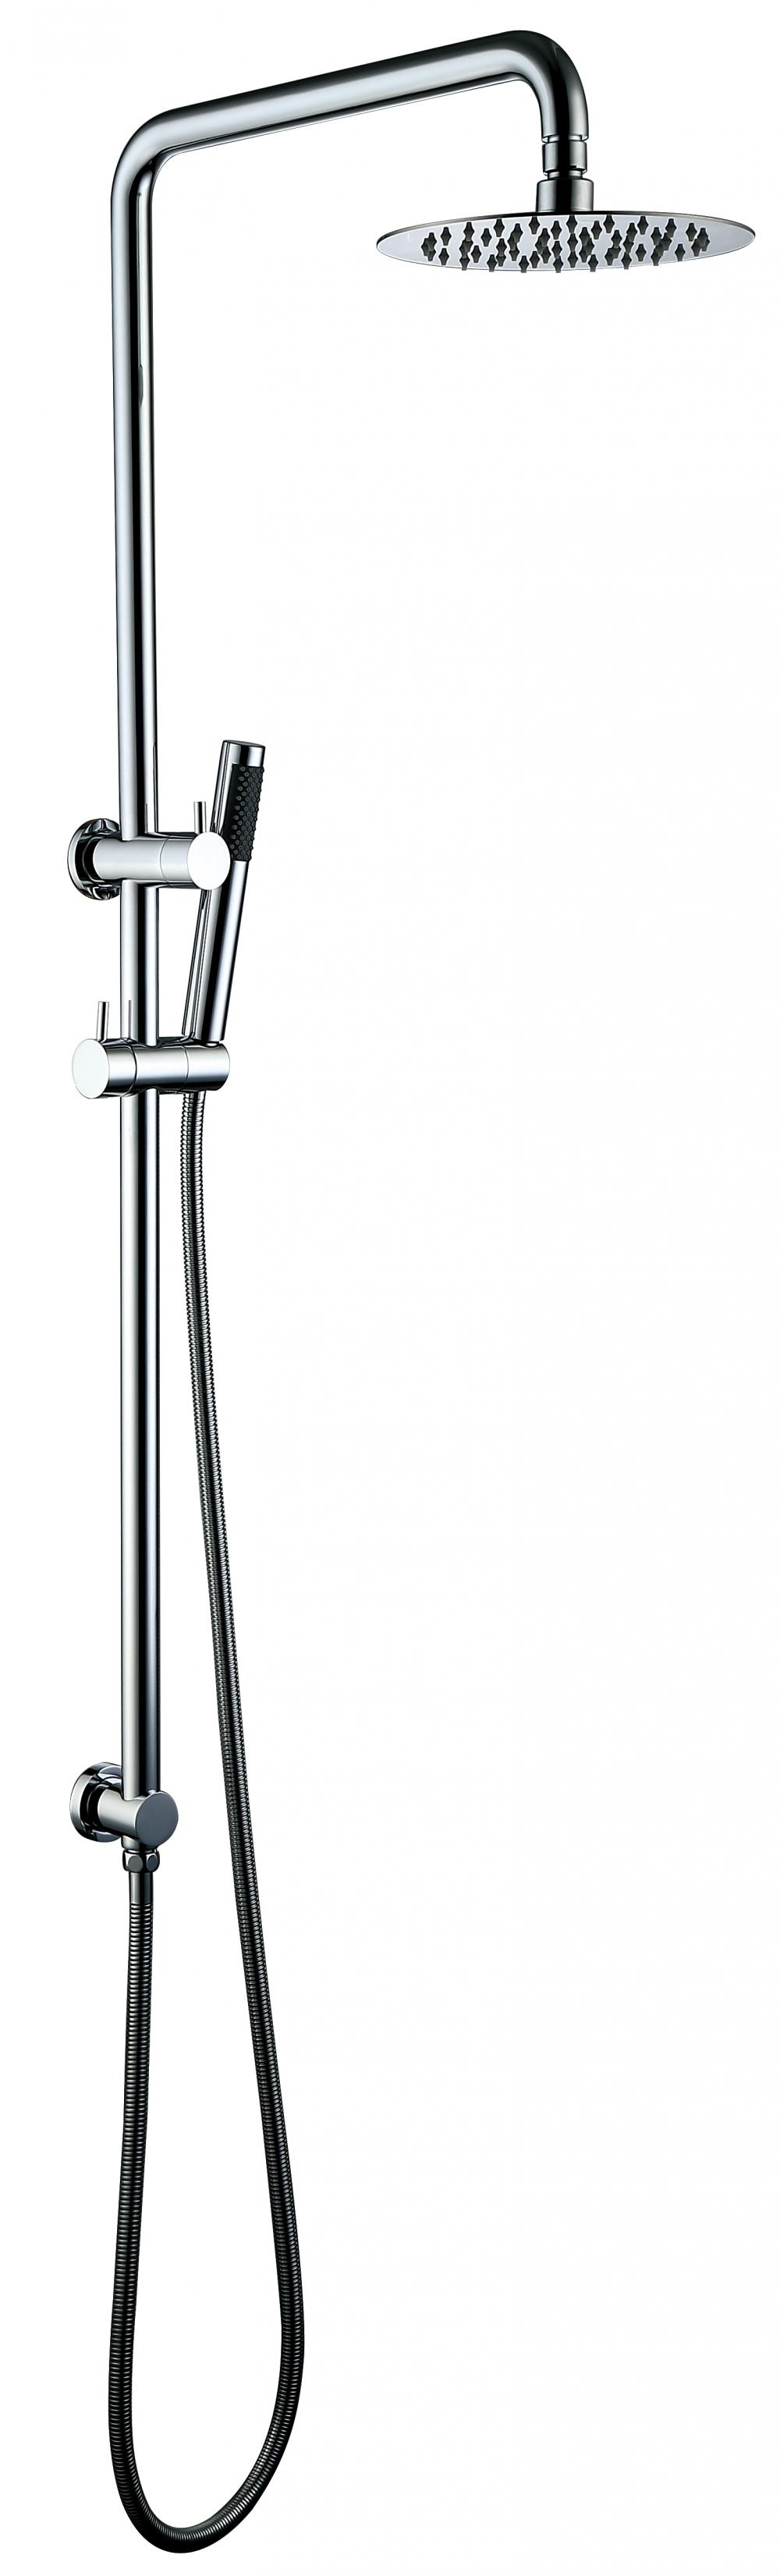 Shower Faucet Set With Adjustable Hand Sprayer